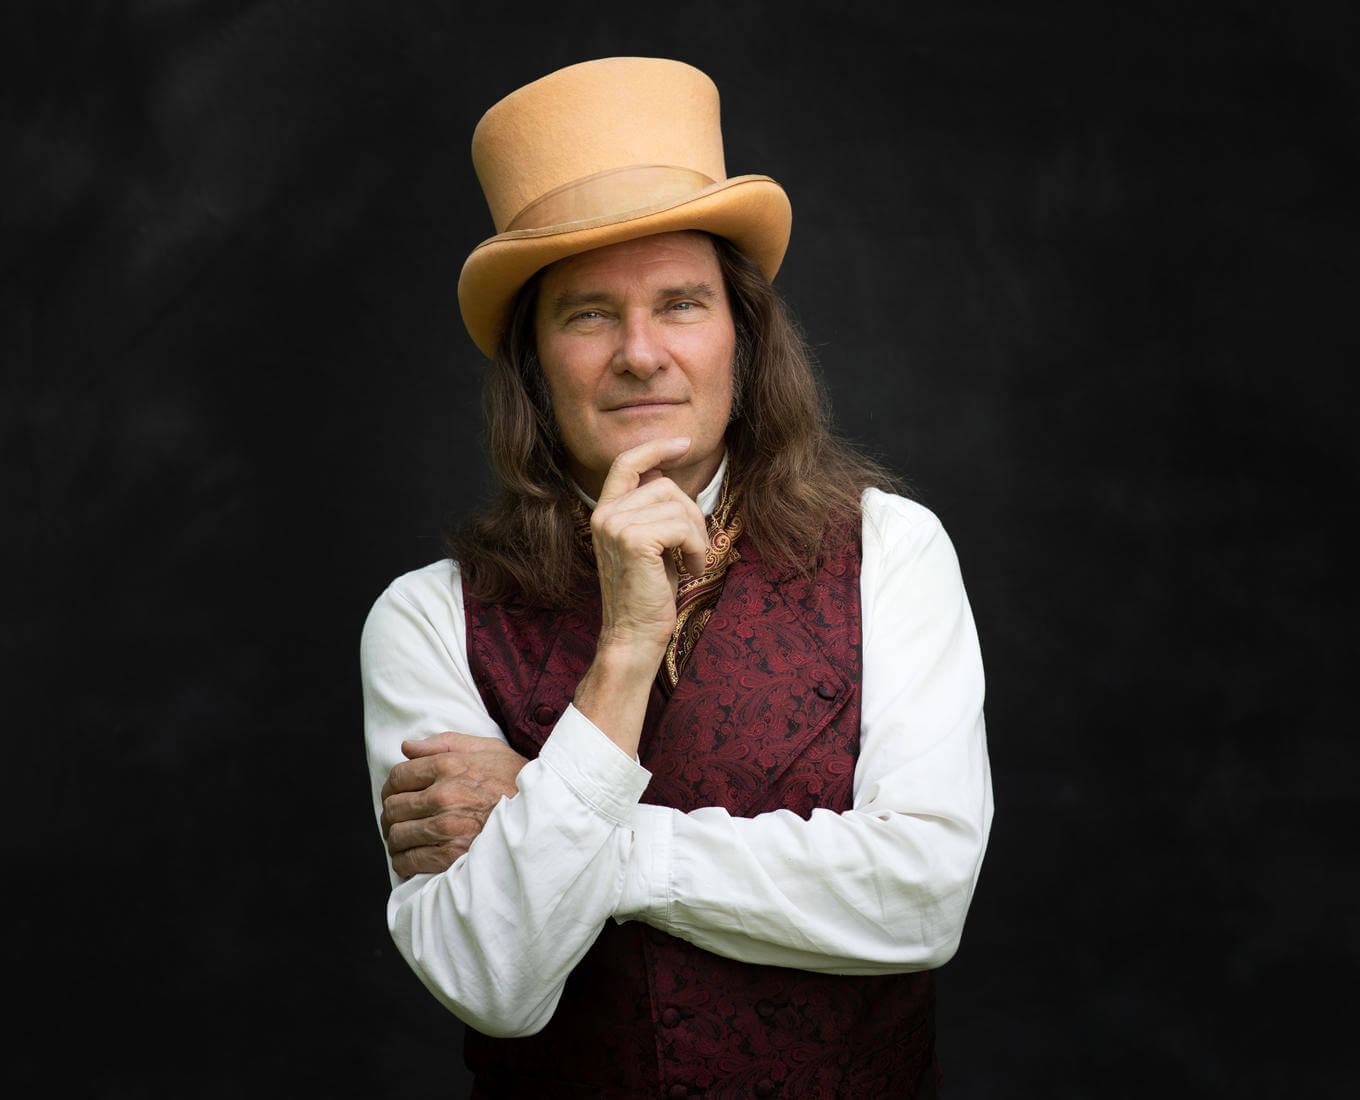 A white man in a top hat vest poses with his hand on his chin